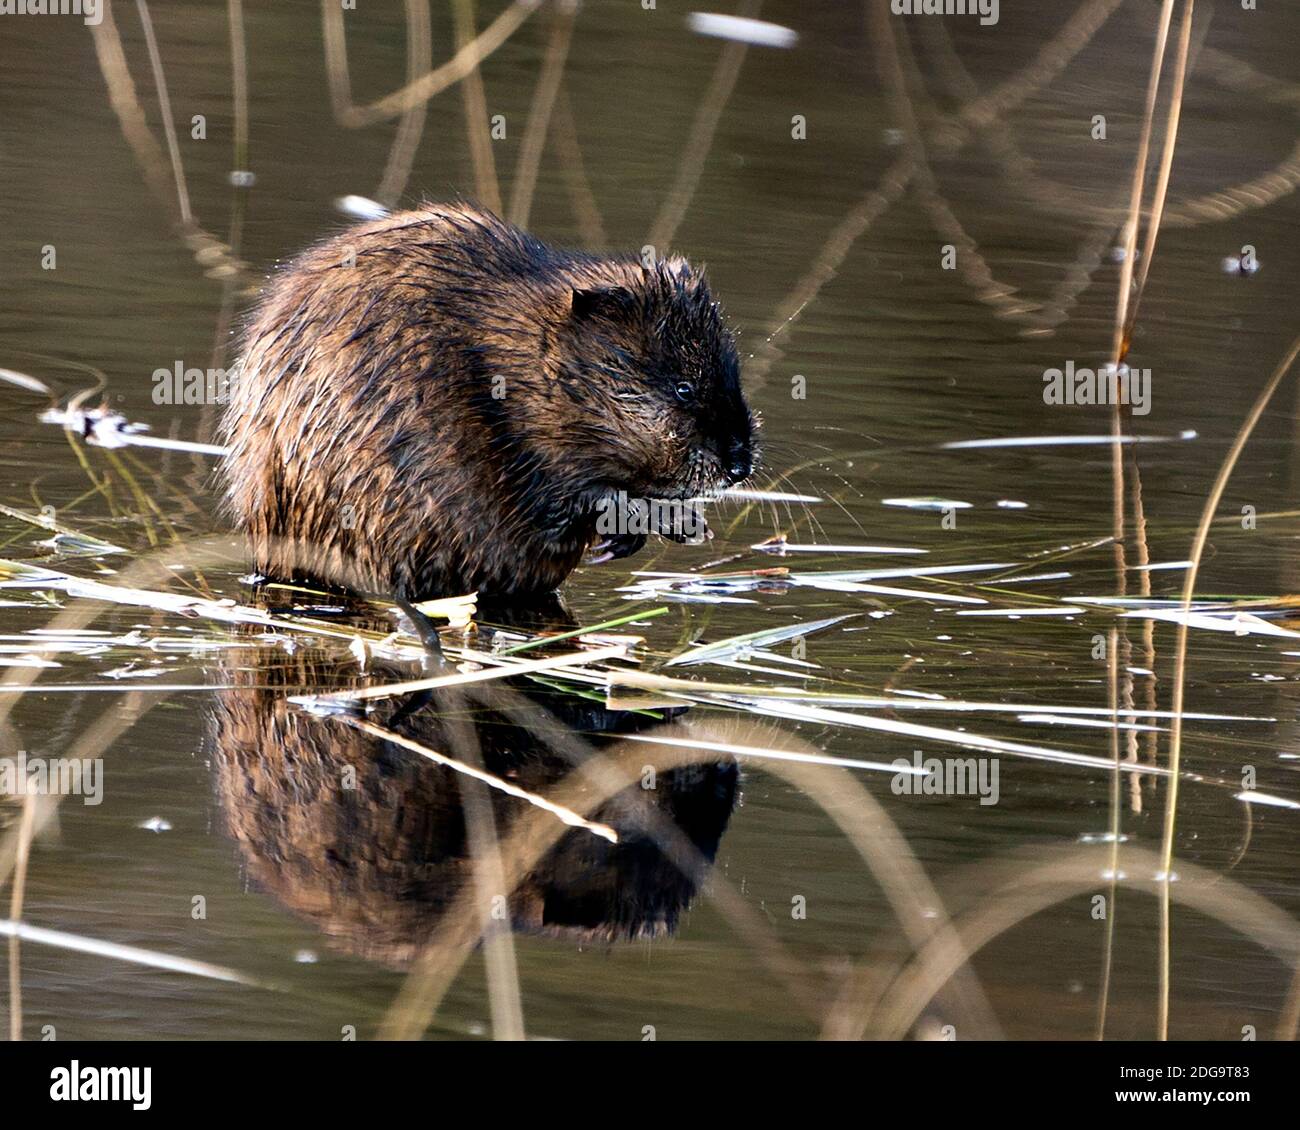 Muskrat stock photos. Muskrat in the water displaying its brown fur by a log with a blur water background in its environment and habitat. Image. Pictu Stock Photo